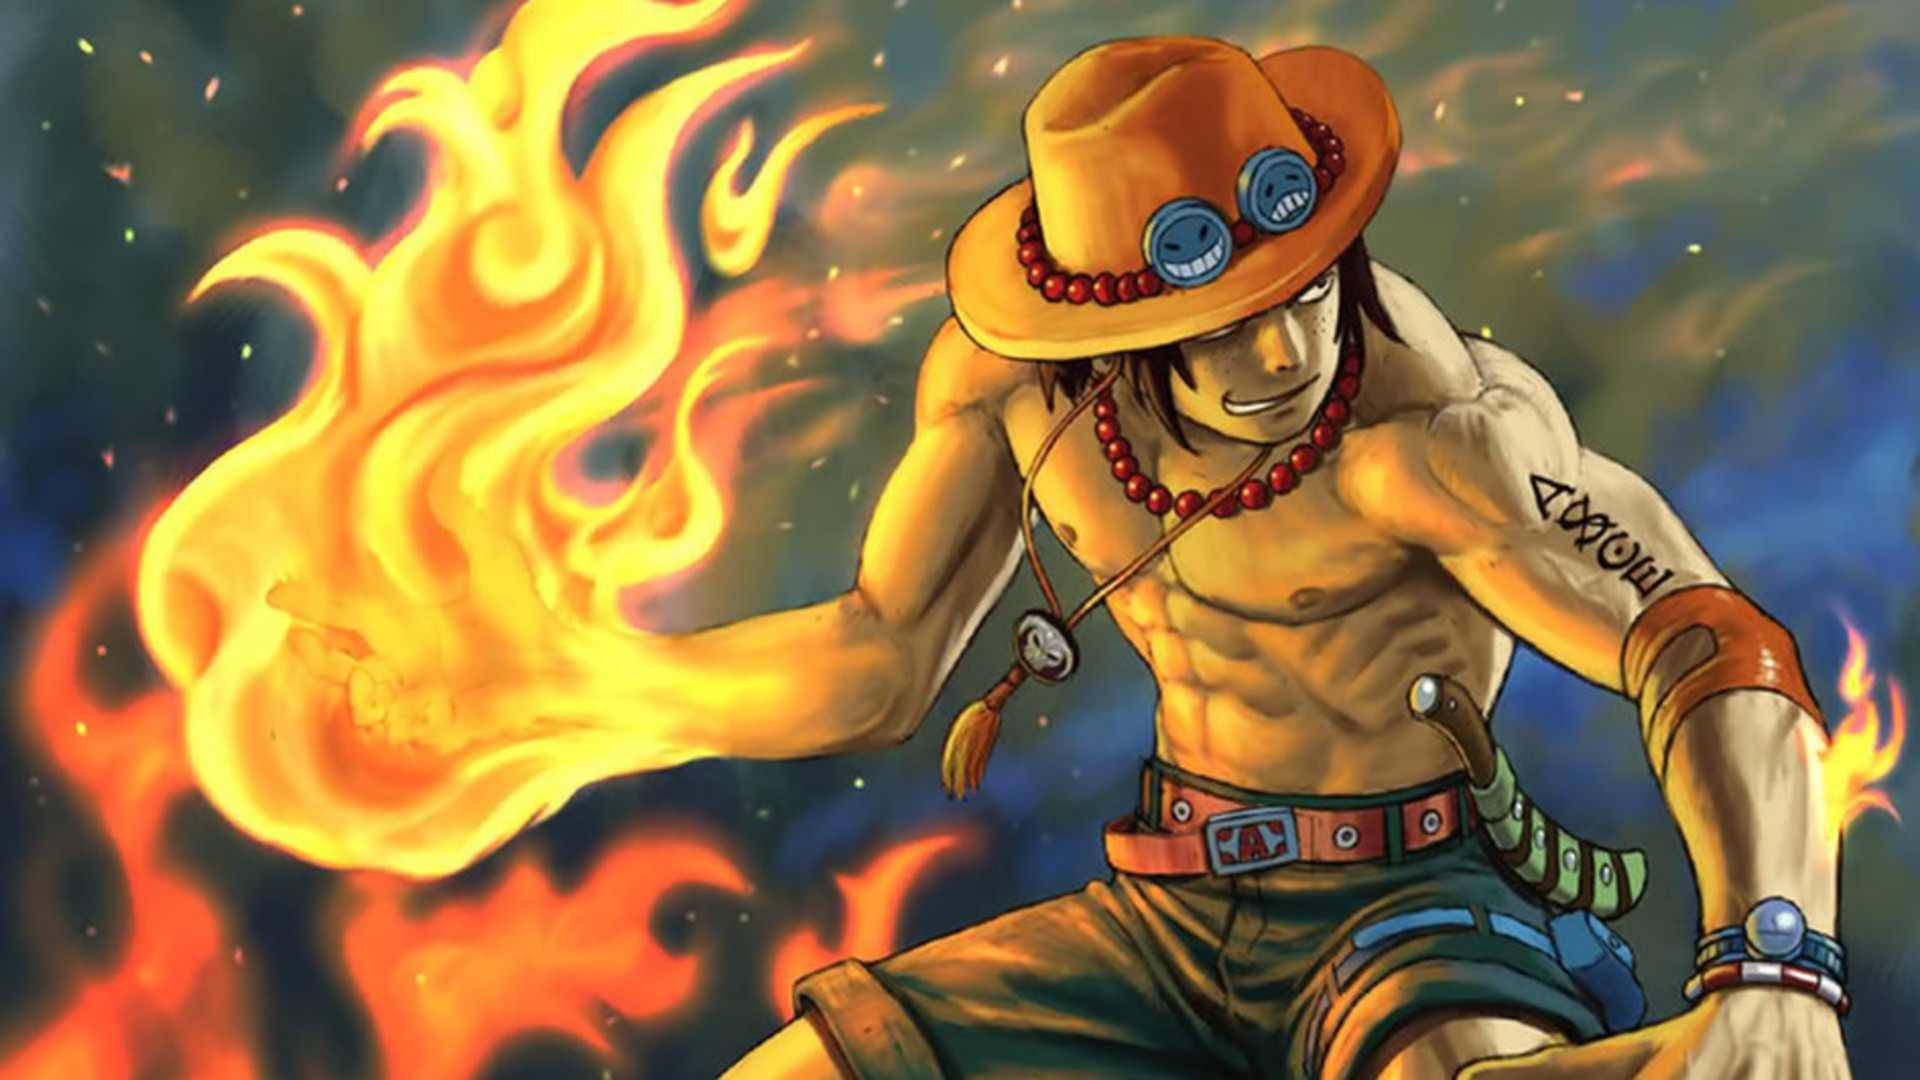 ace the best   One Piece Wallpaper